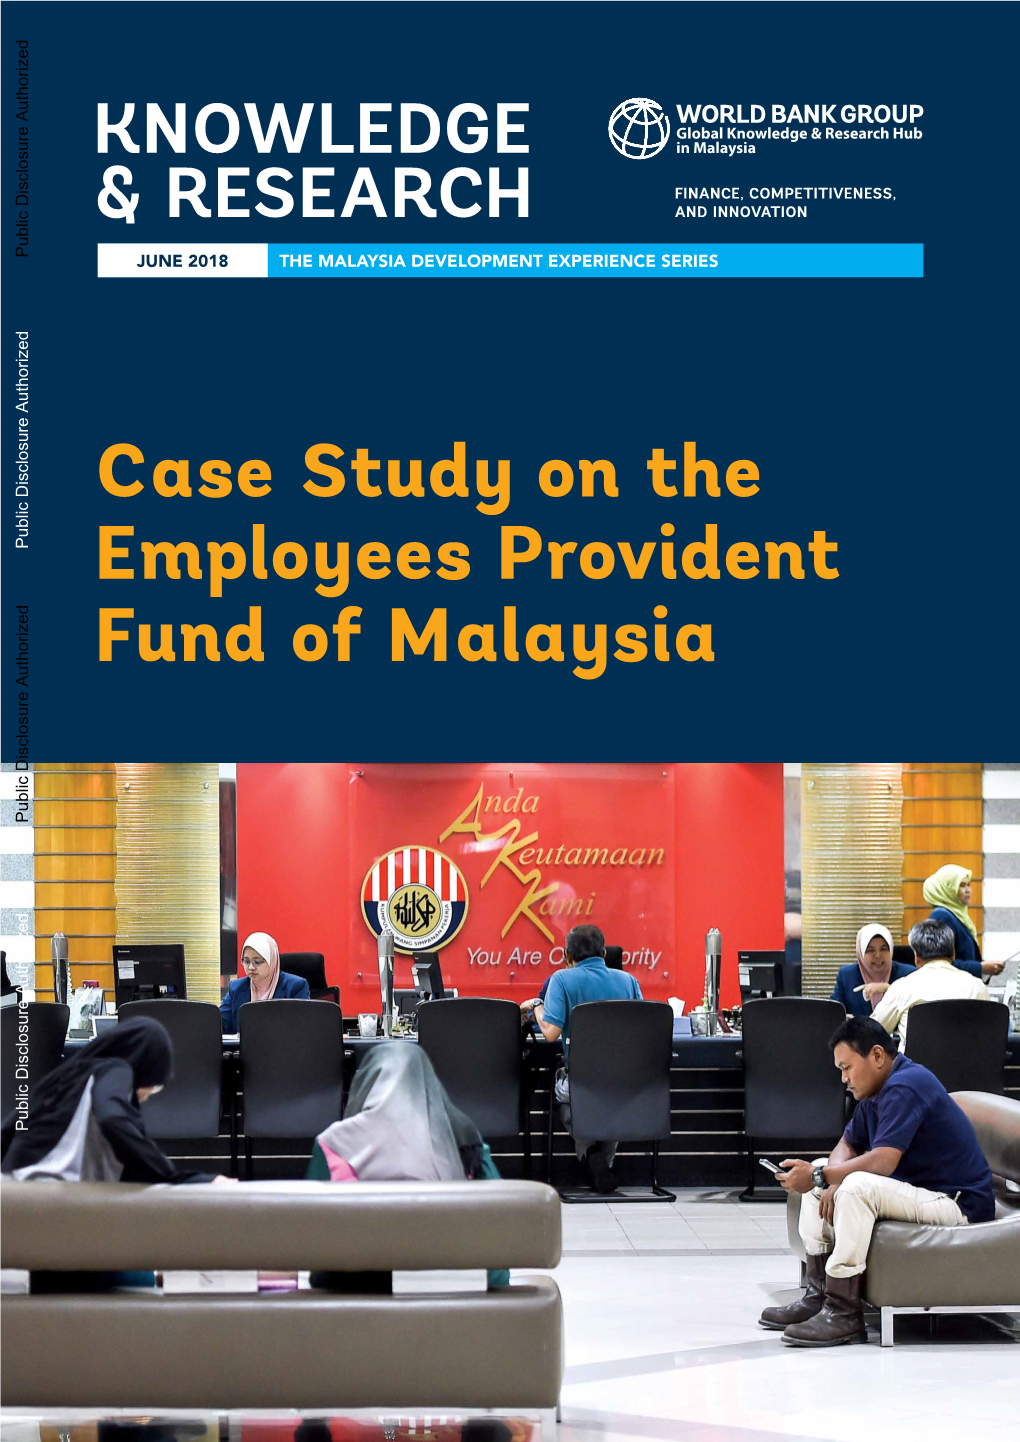 Case Study on the Employees Provident Fund of Malaysia